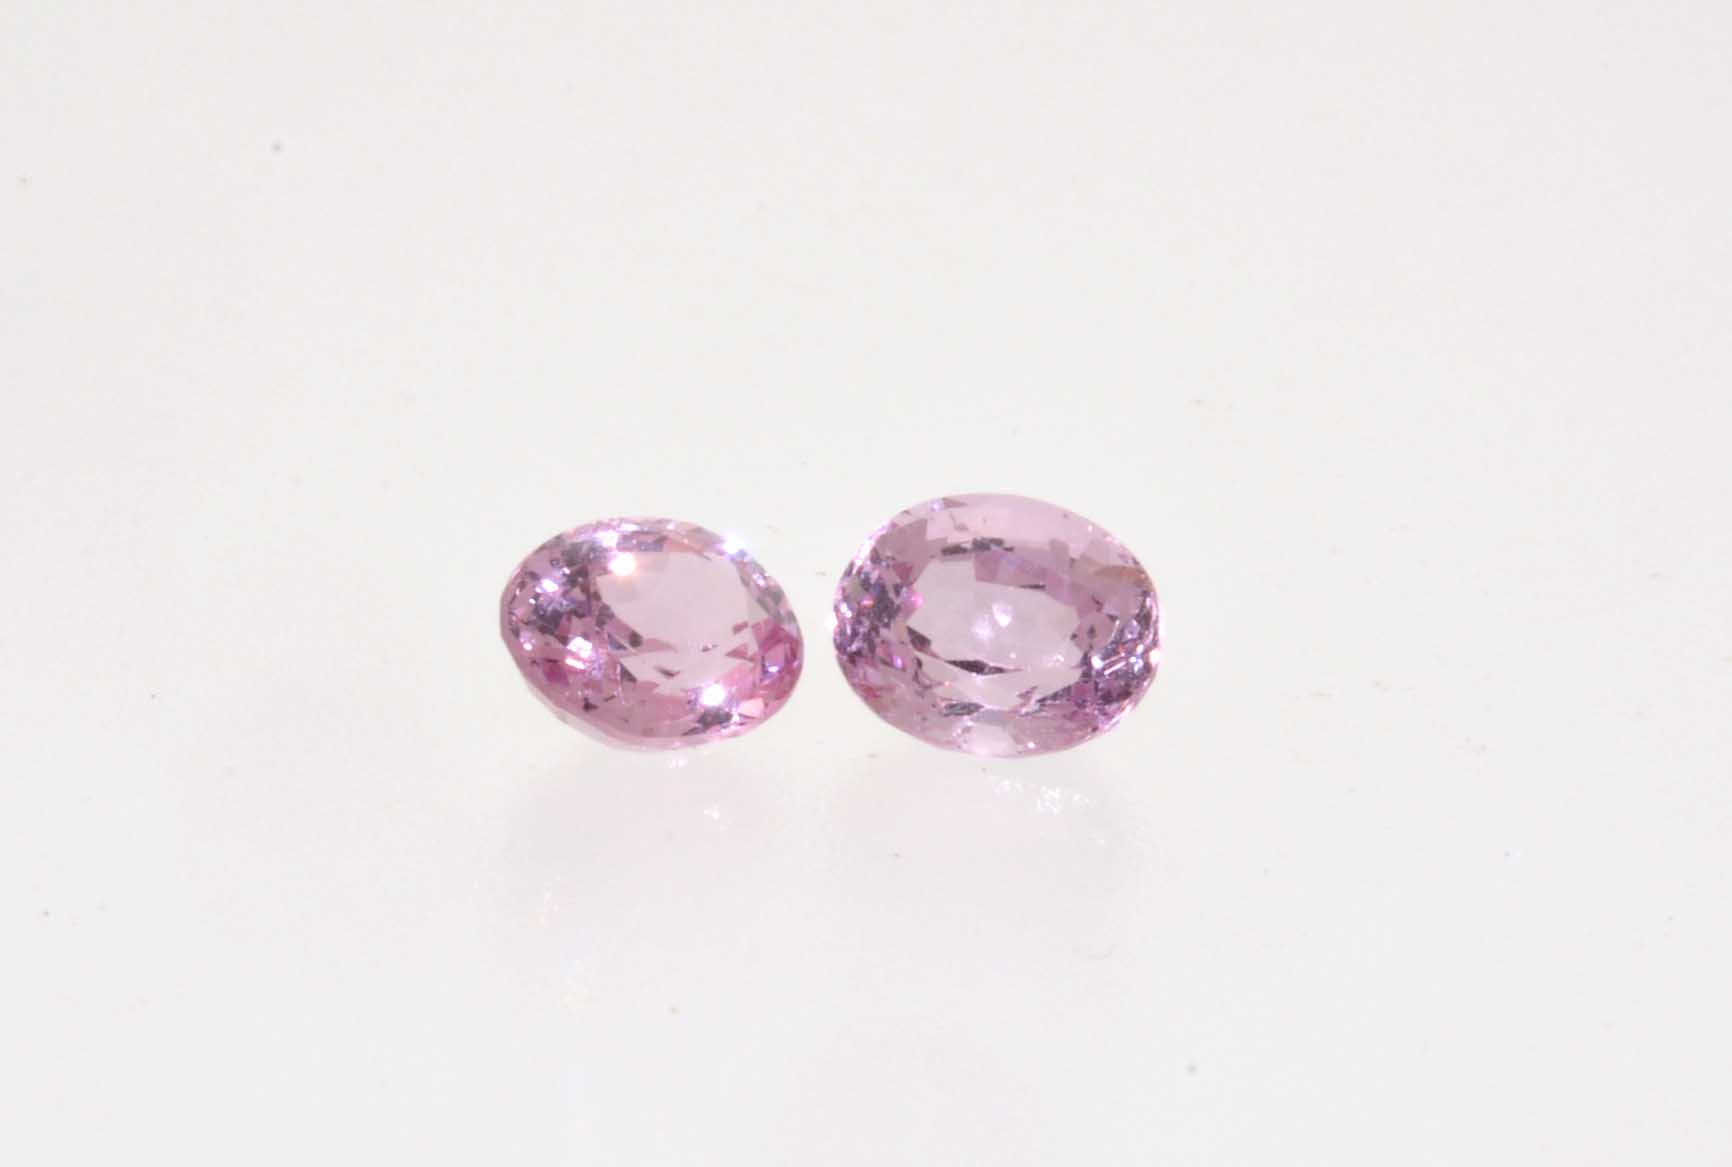 PINK SPINEL OVAL PAIR